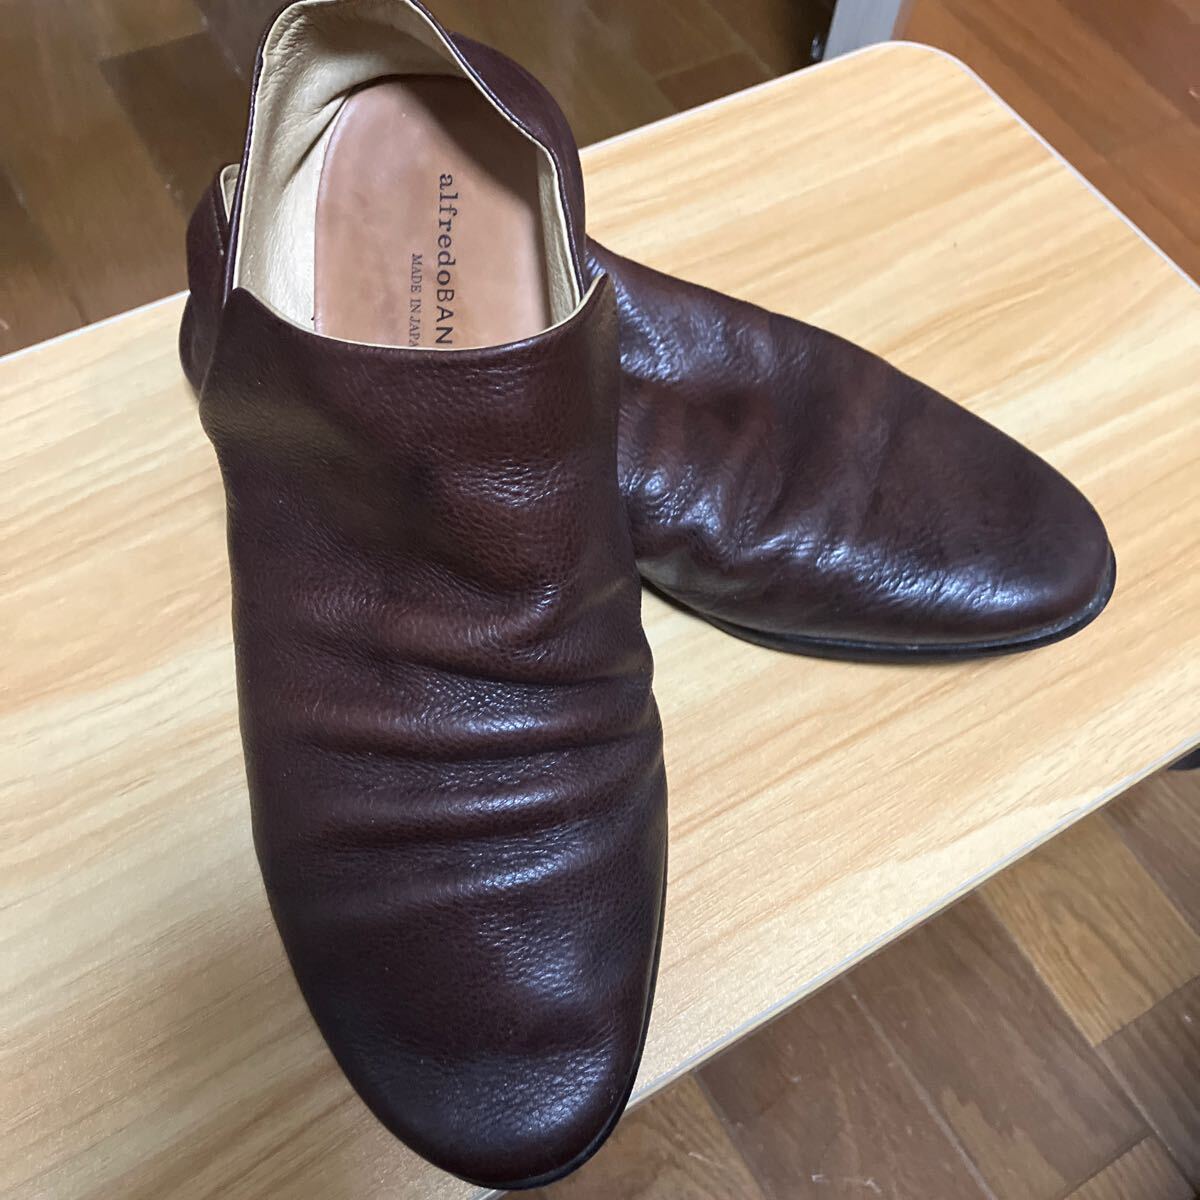  leather shoes Brown alfredoBANNISTER Alfredo Bannister 42 26.5 from 27.5 about 